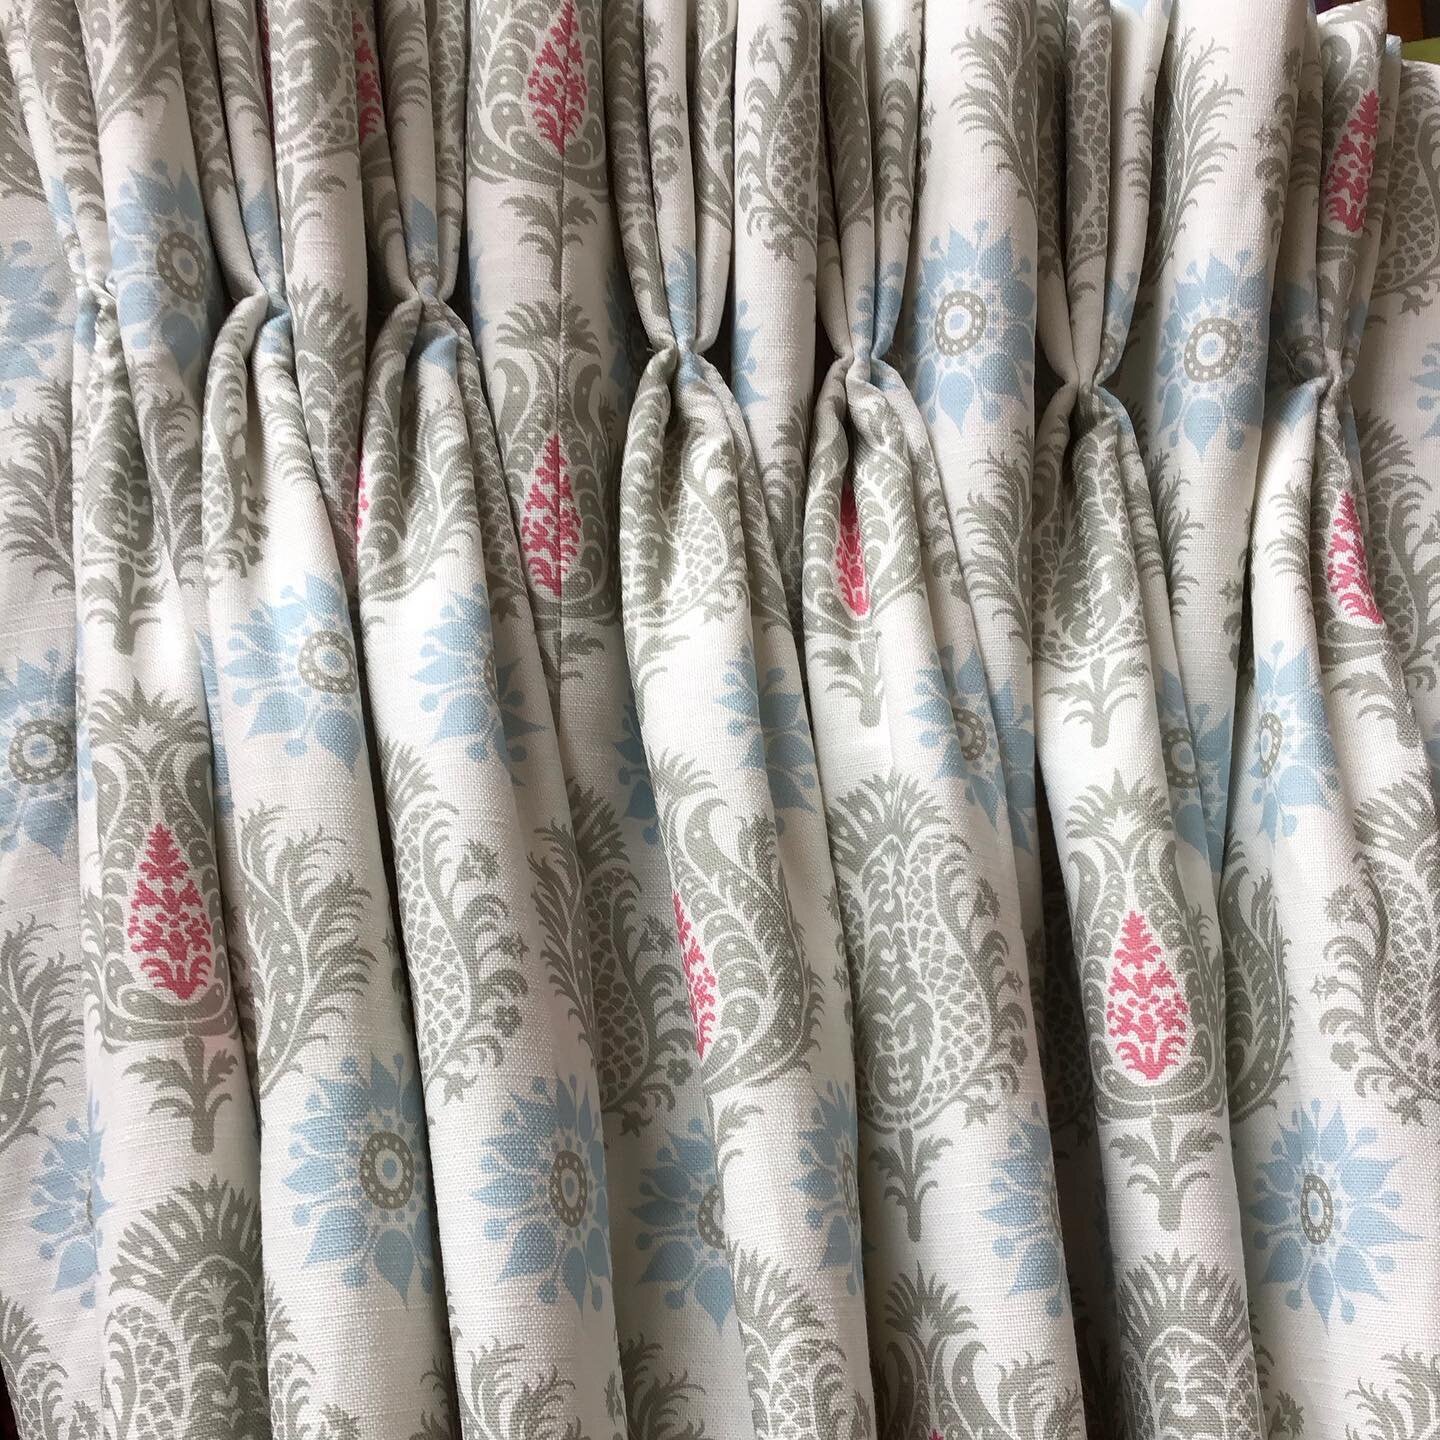 Give your room a regal look with these striking Sharanshar Charlotte Gaisford curtains. Sharanshar  meaning &lsquo;King of Kings&rsquo;. A classic design with an injection of modern colour.
#designercurtains #bettypink #charlottegaisford #handmadecur